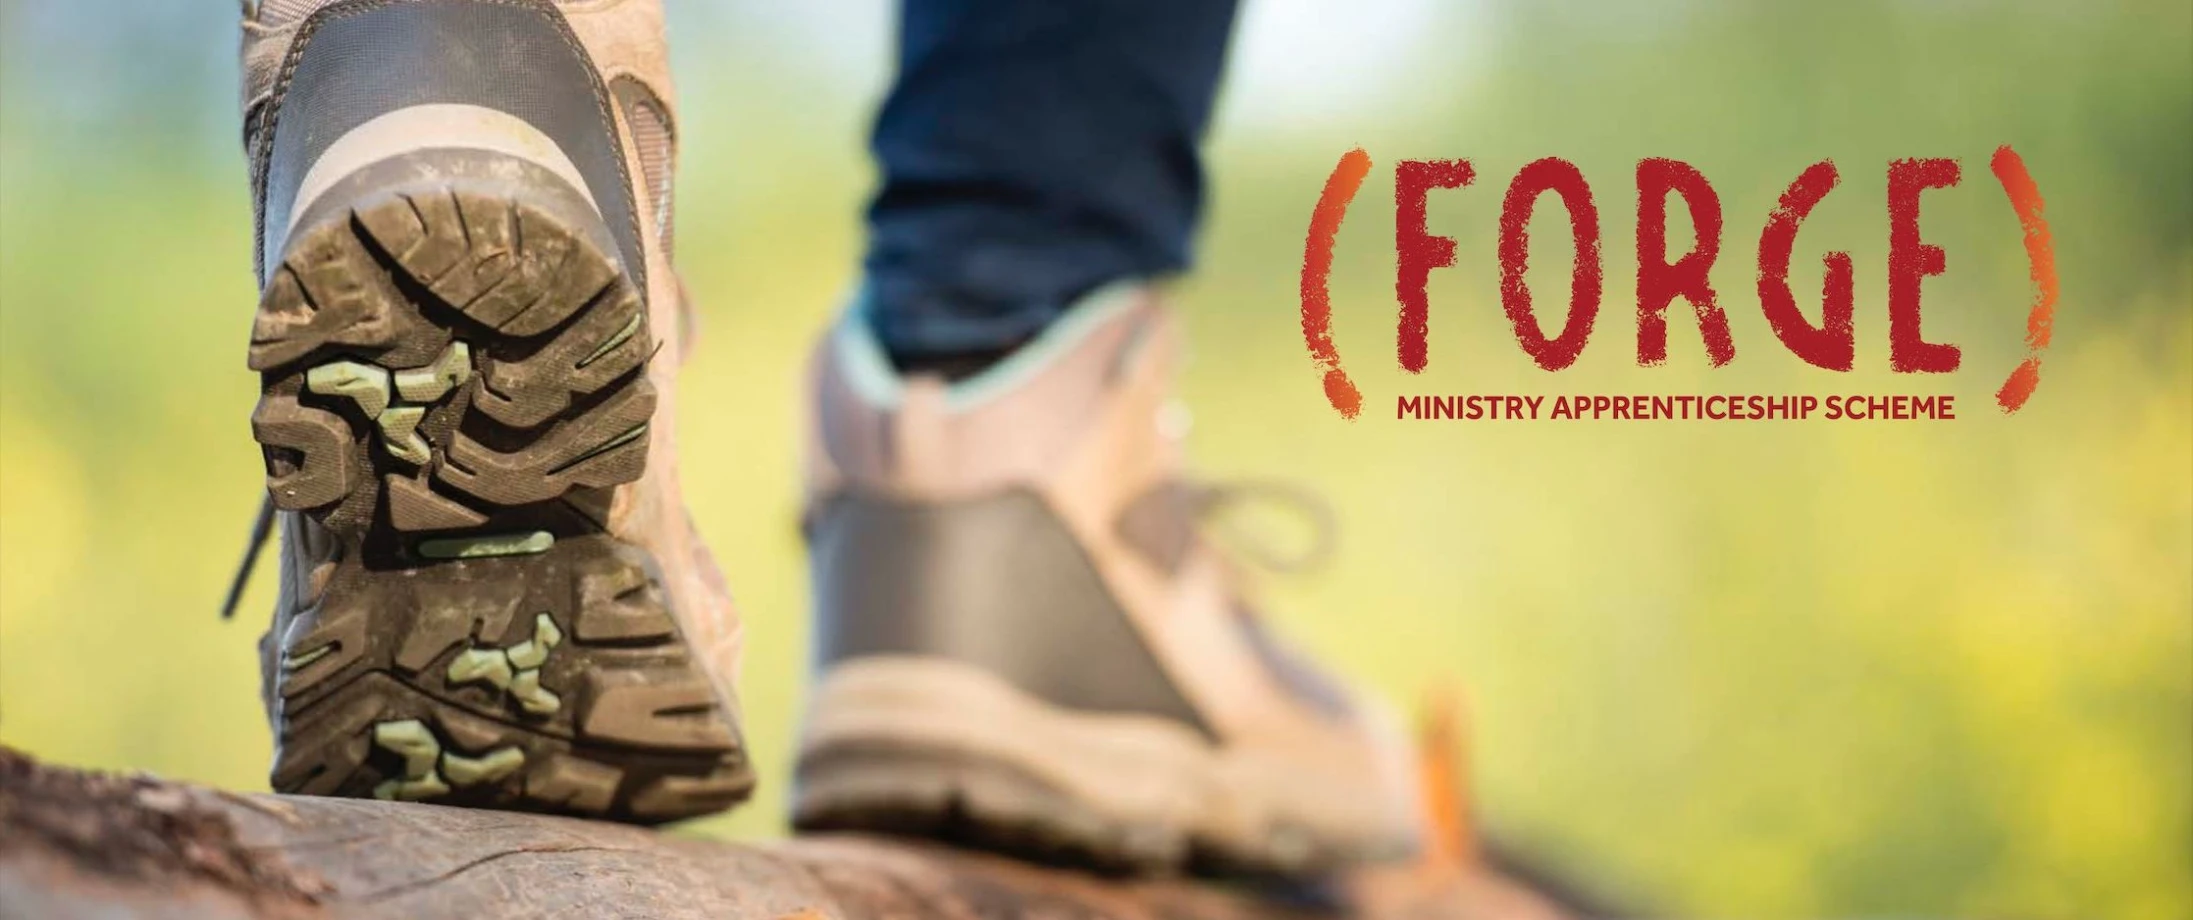 Apply to become a FORGE Ministry Apprentice